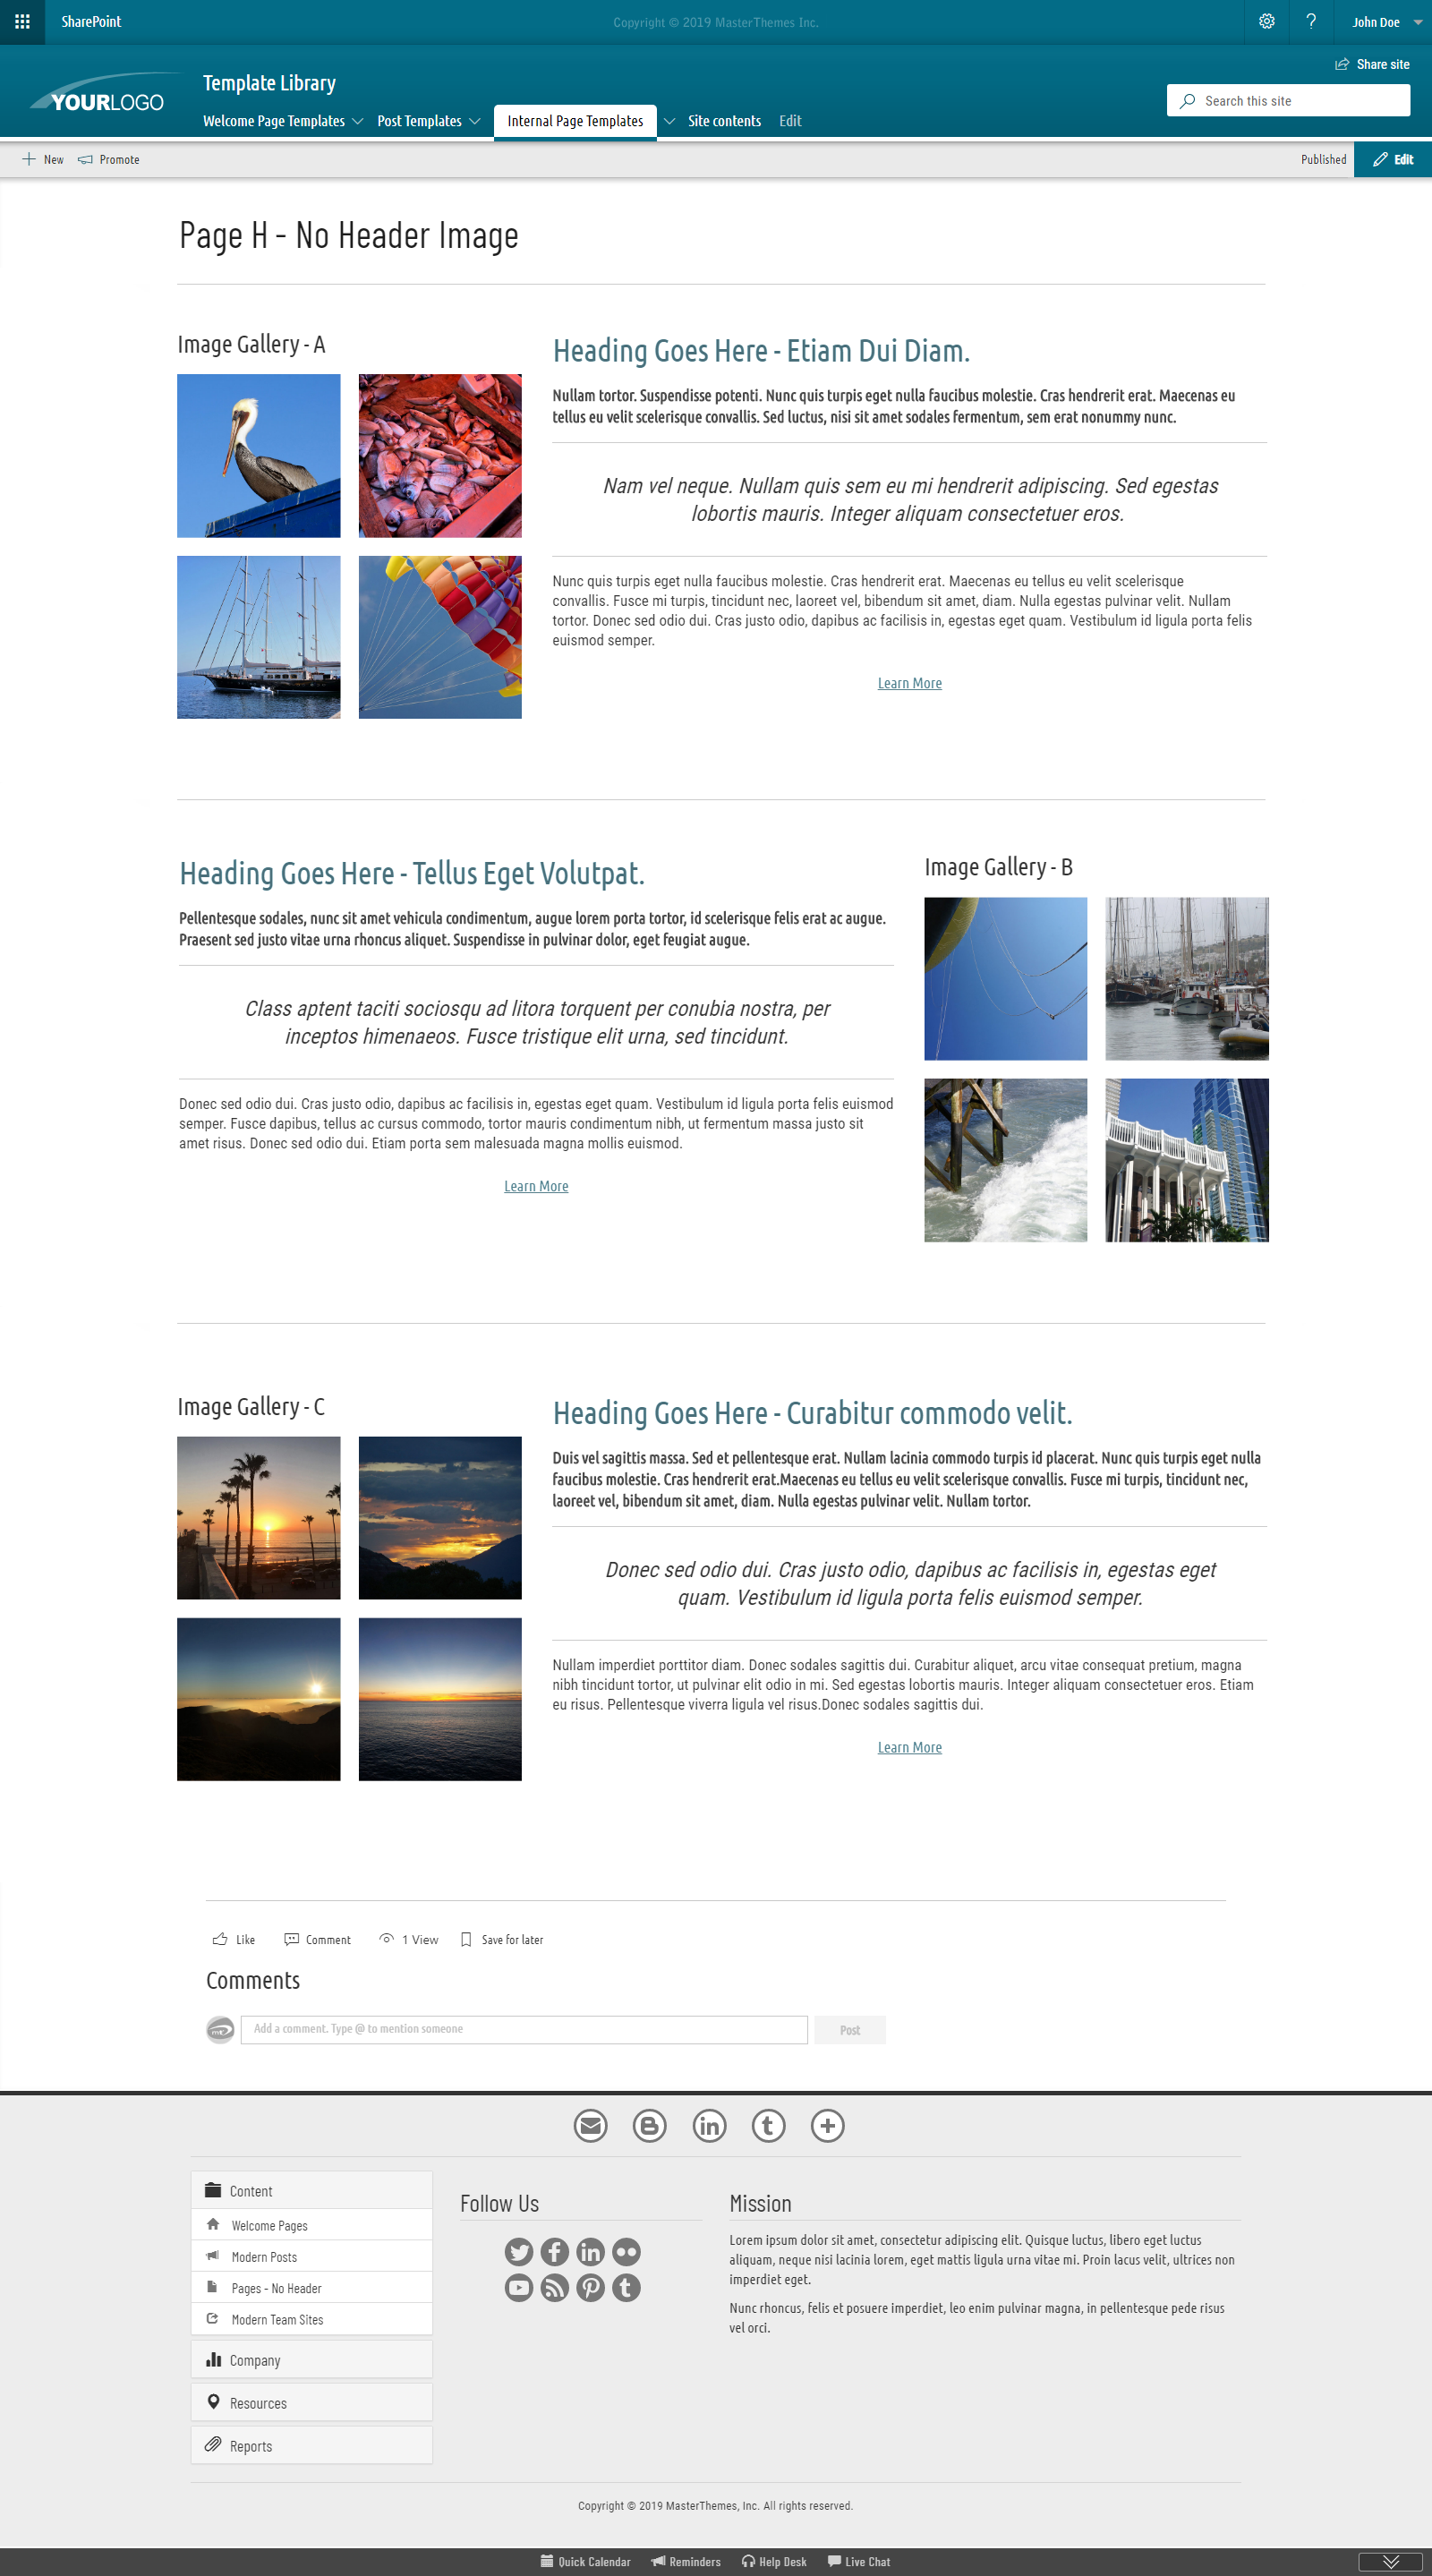 Layout Template - Page H without Header Image - Modern Template for SharePoint 2019